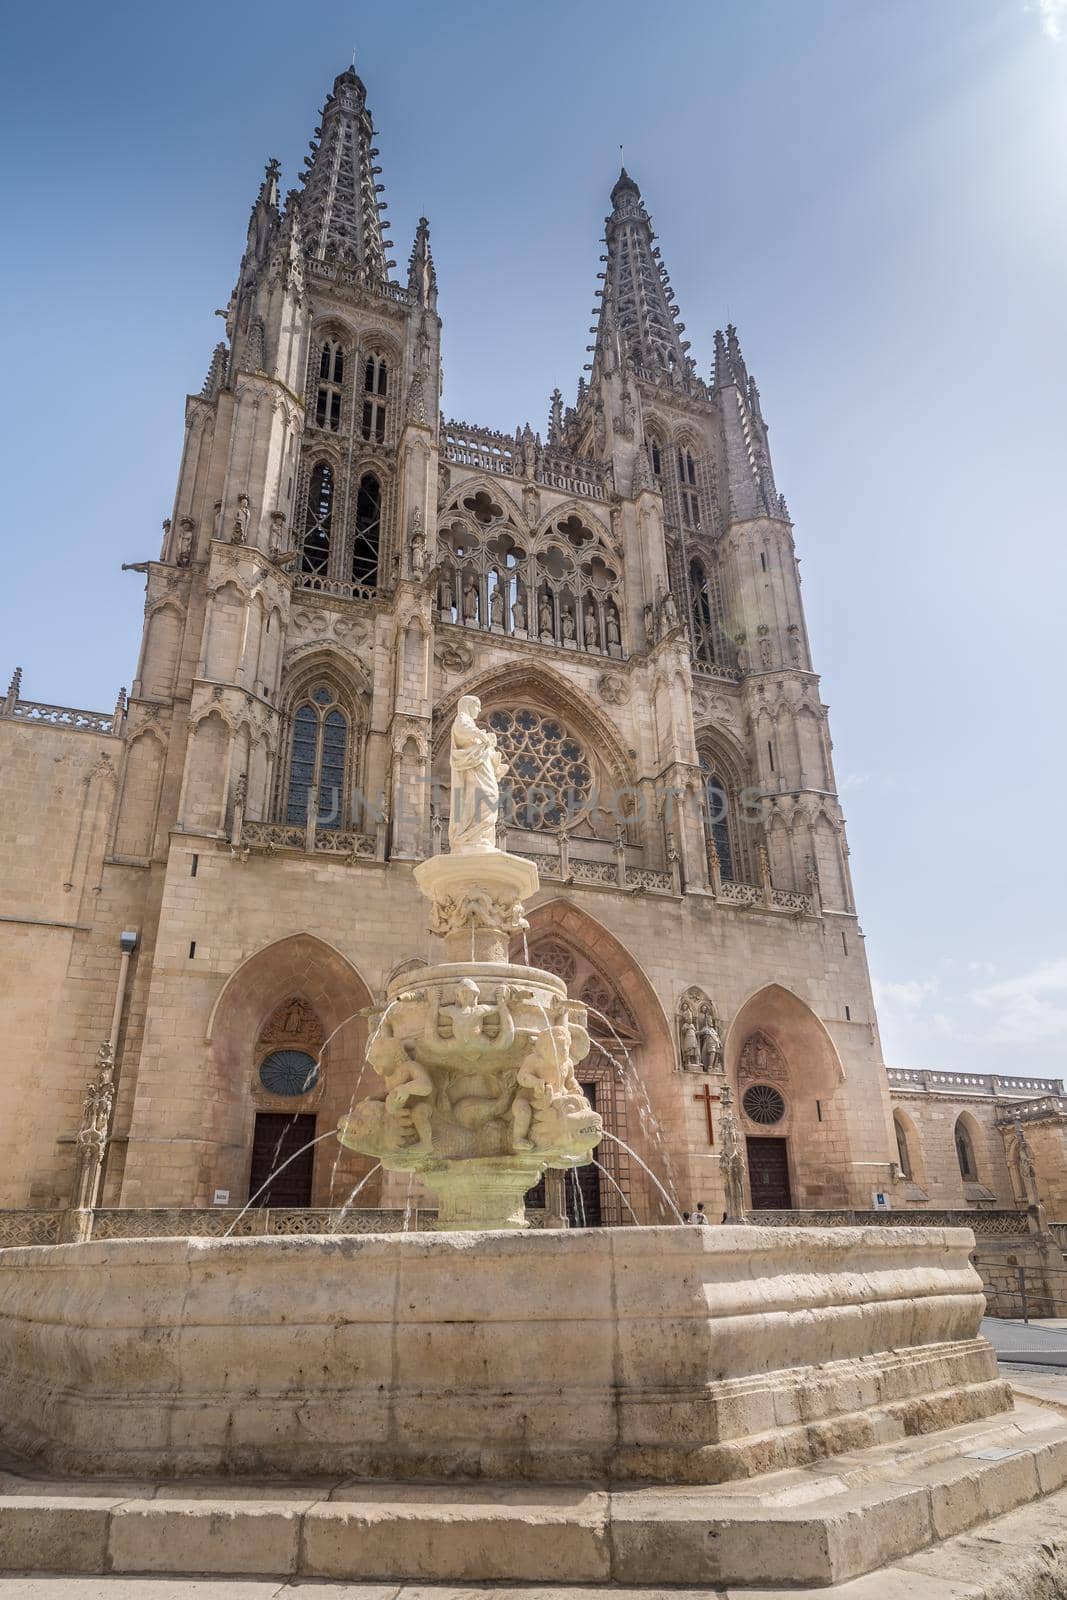 The Cathedral of Saint Mary in Burgos in Castilla y Leon, Spain.